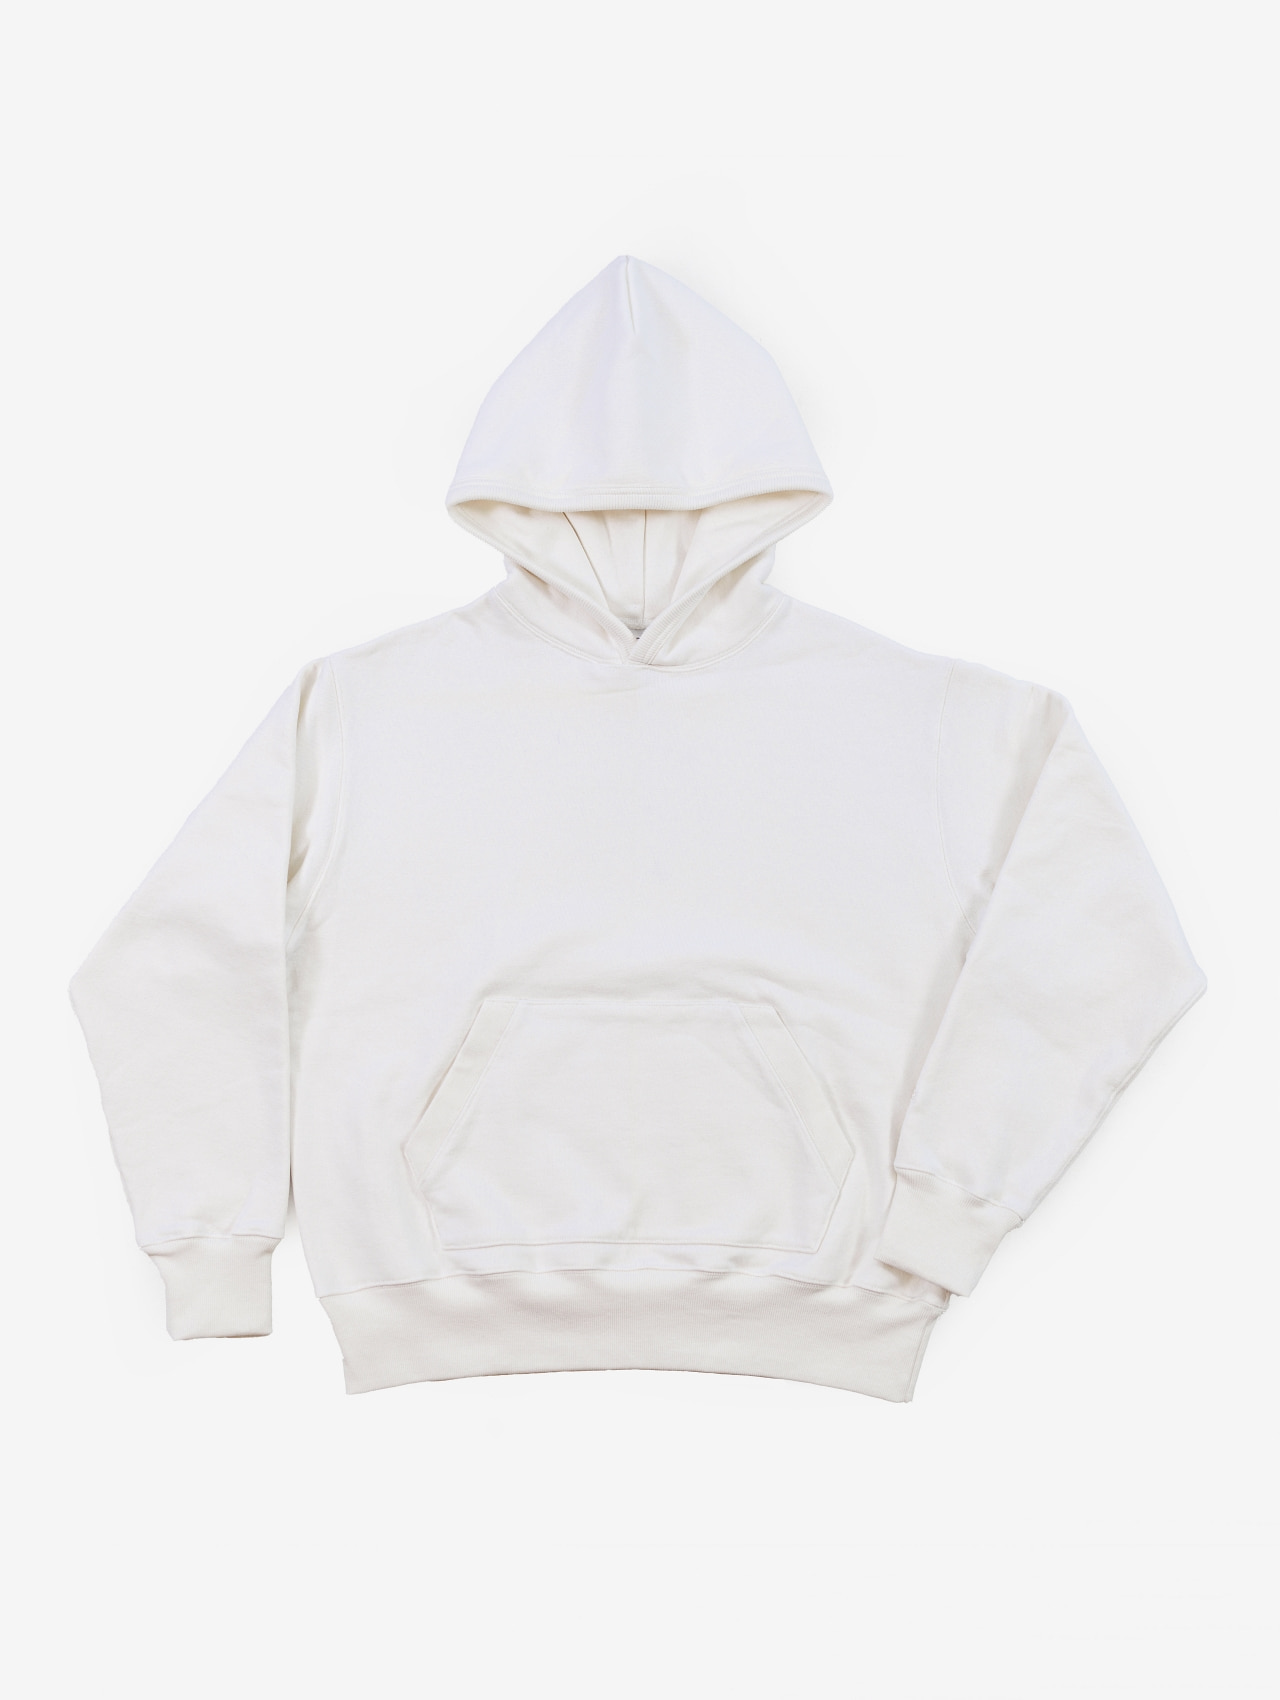 3.52 POUNDS IVORY HOODIE